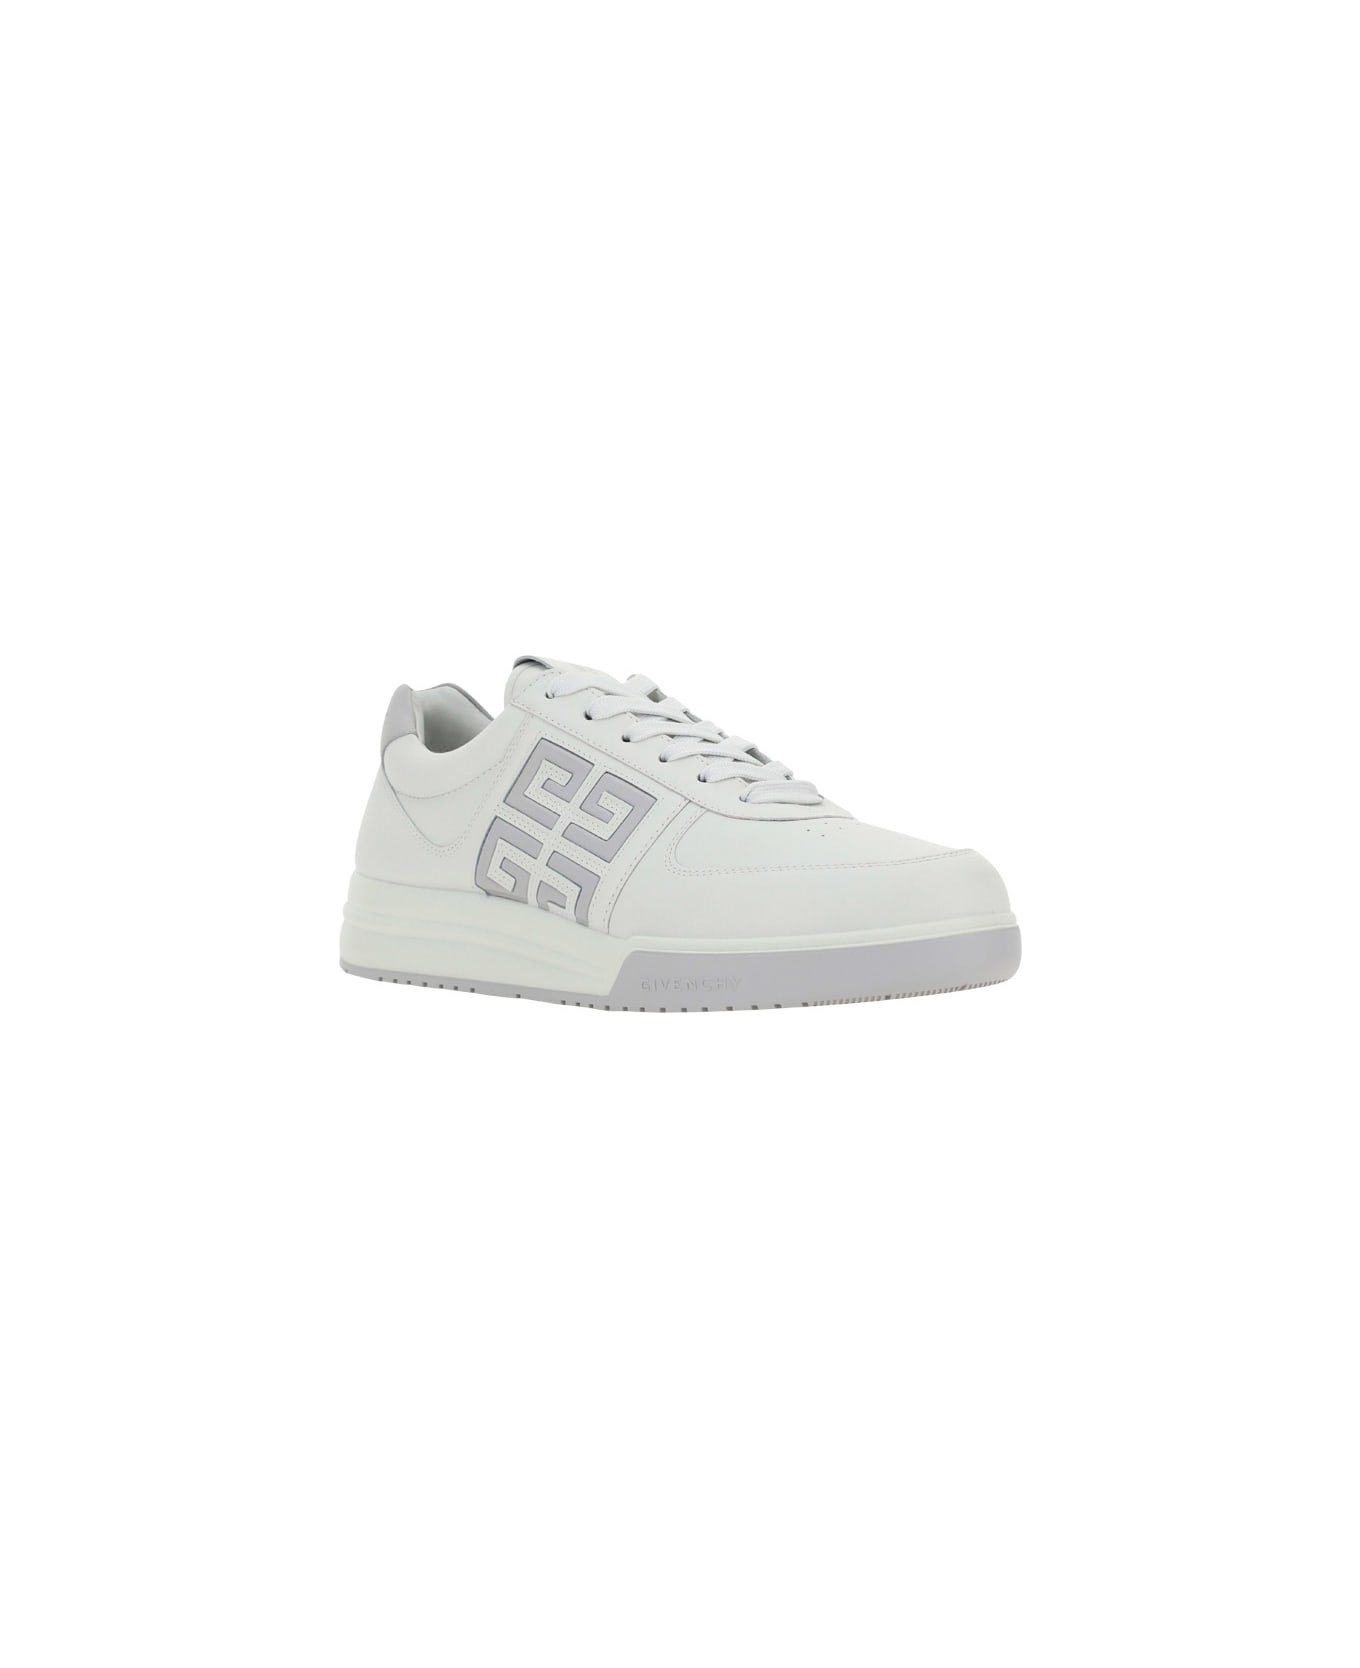 Givenchy 'g4' Sneakers - White/grey スニーカー